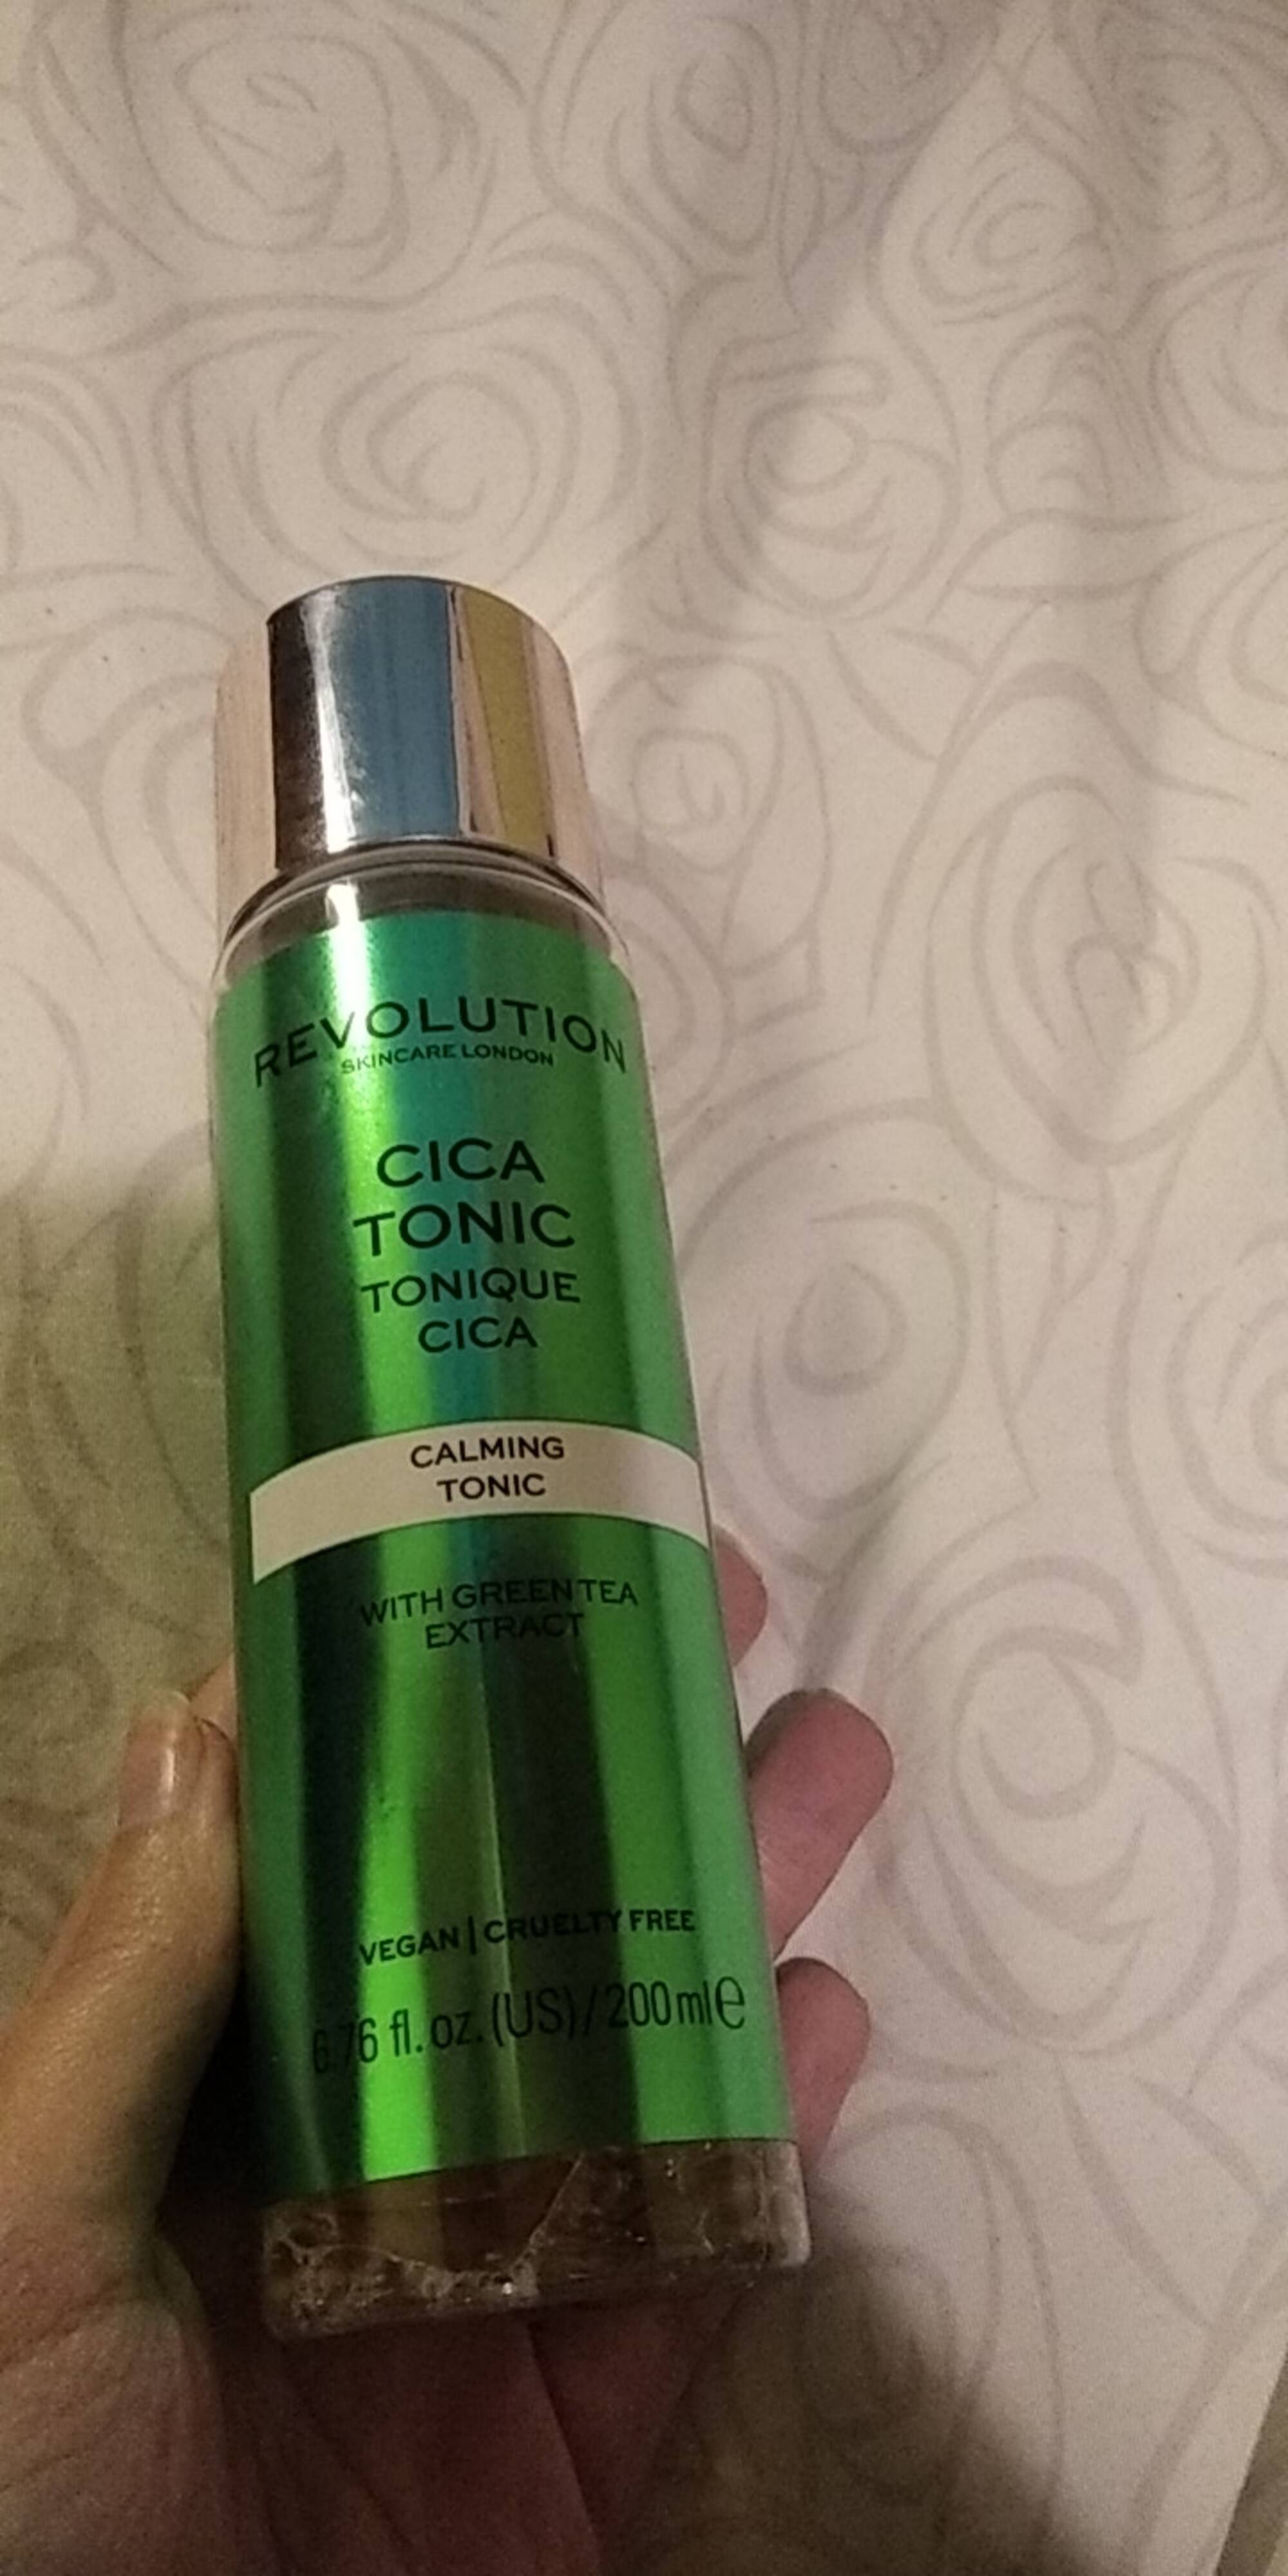 REVOLUTION - Cica tonic with Green tea extract